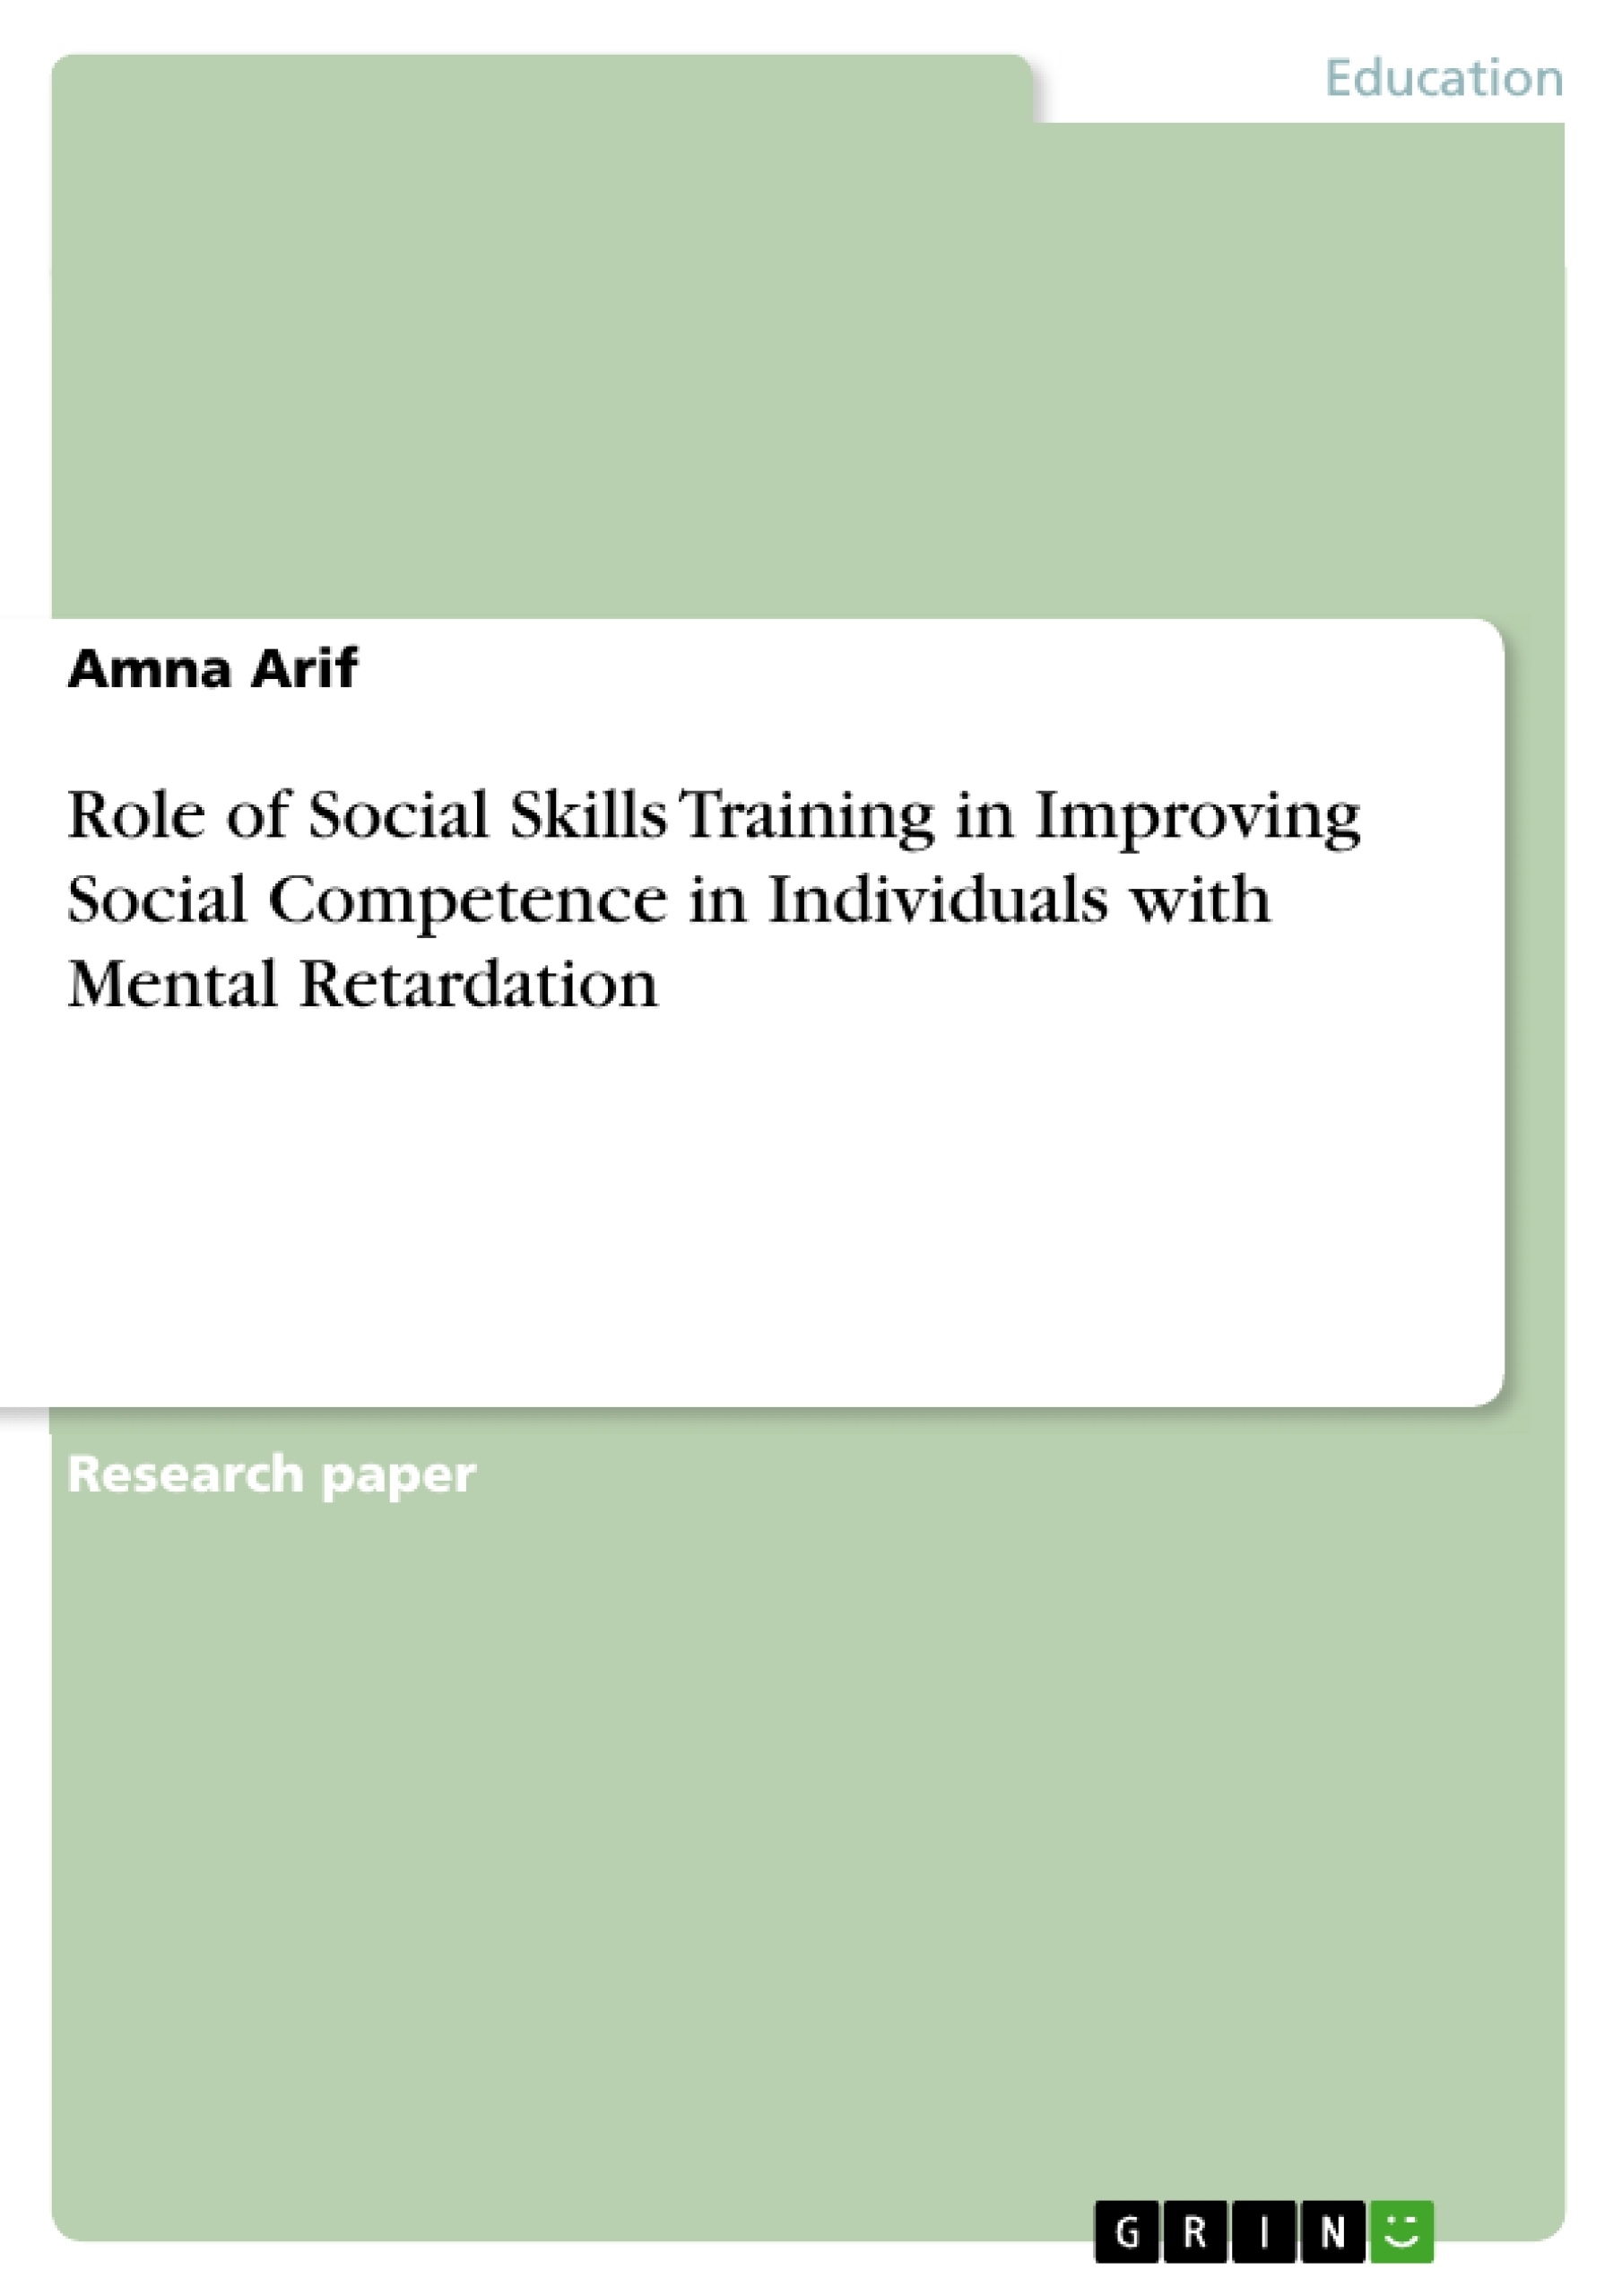 Titre: Role of Social Skills Training in Improving Social Competence in Individuals with Mental Retardation